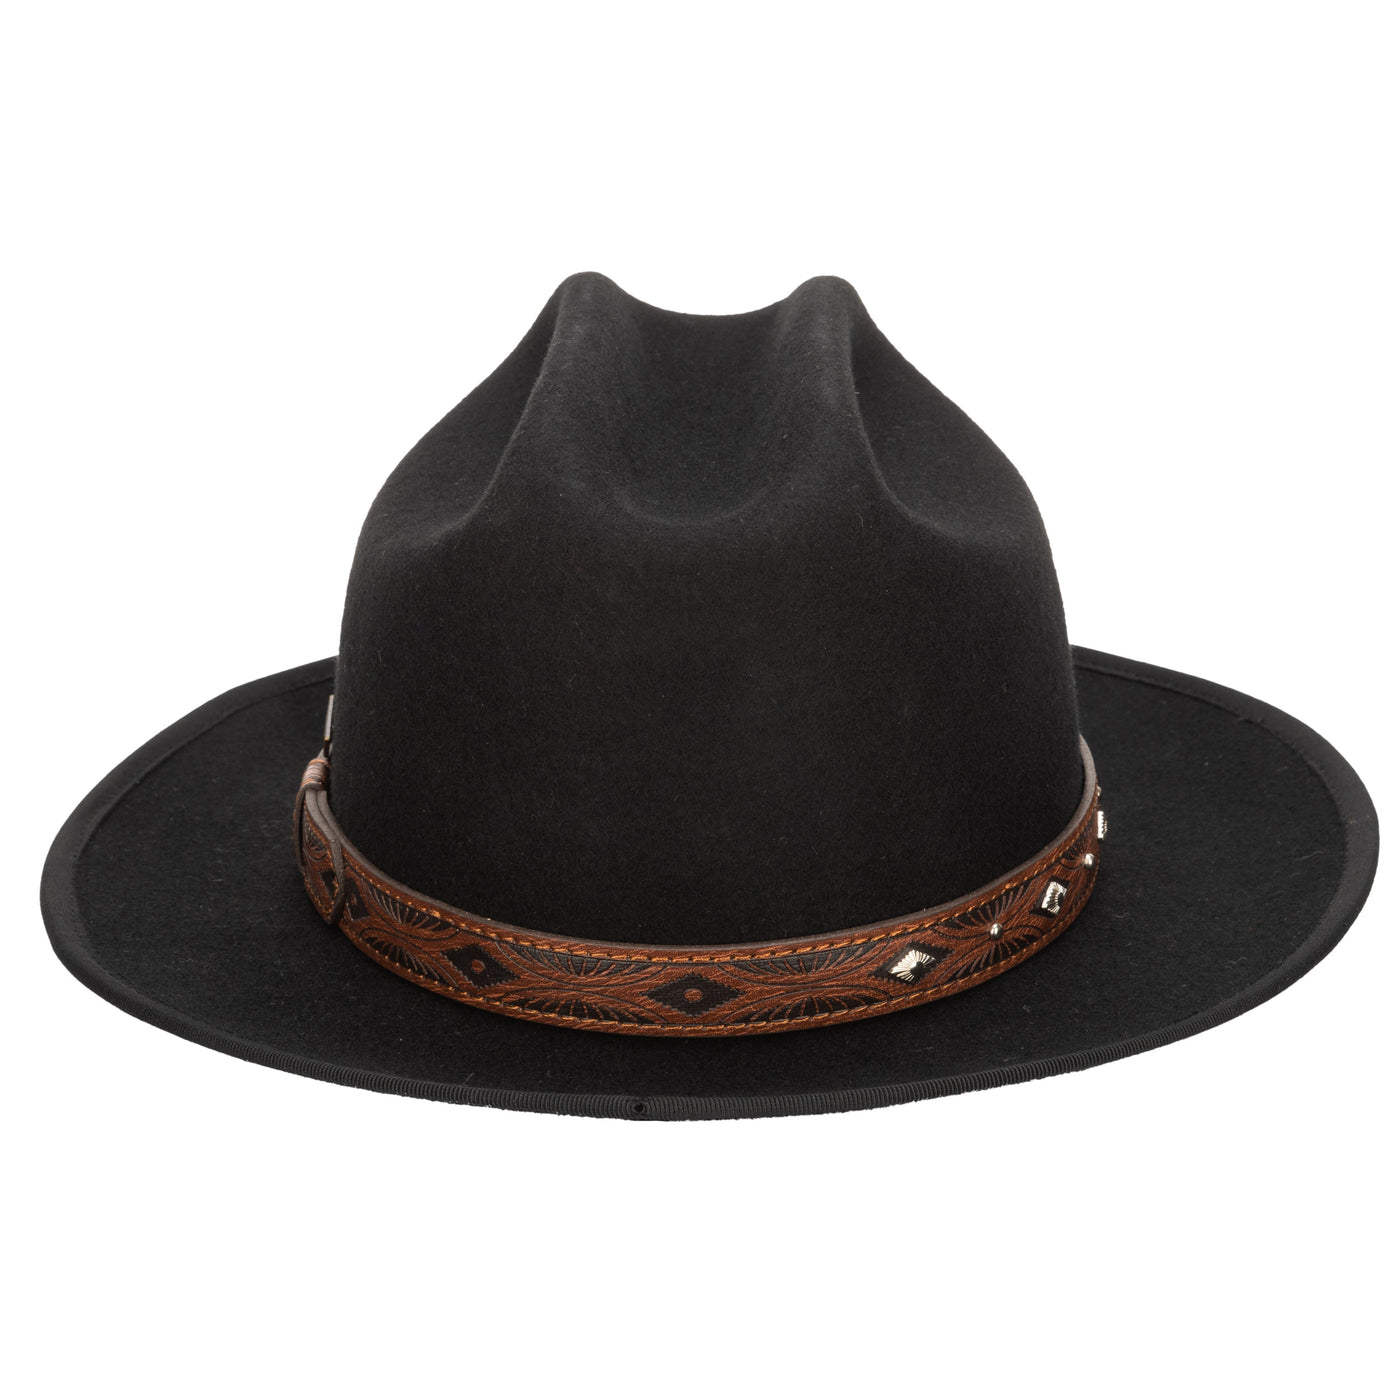 Men's Wool Felt Cowboy Hat With Embossed Faux Leather Trim